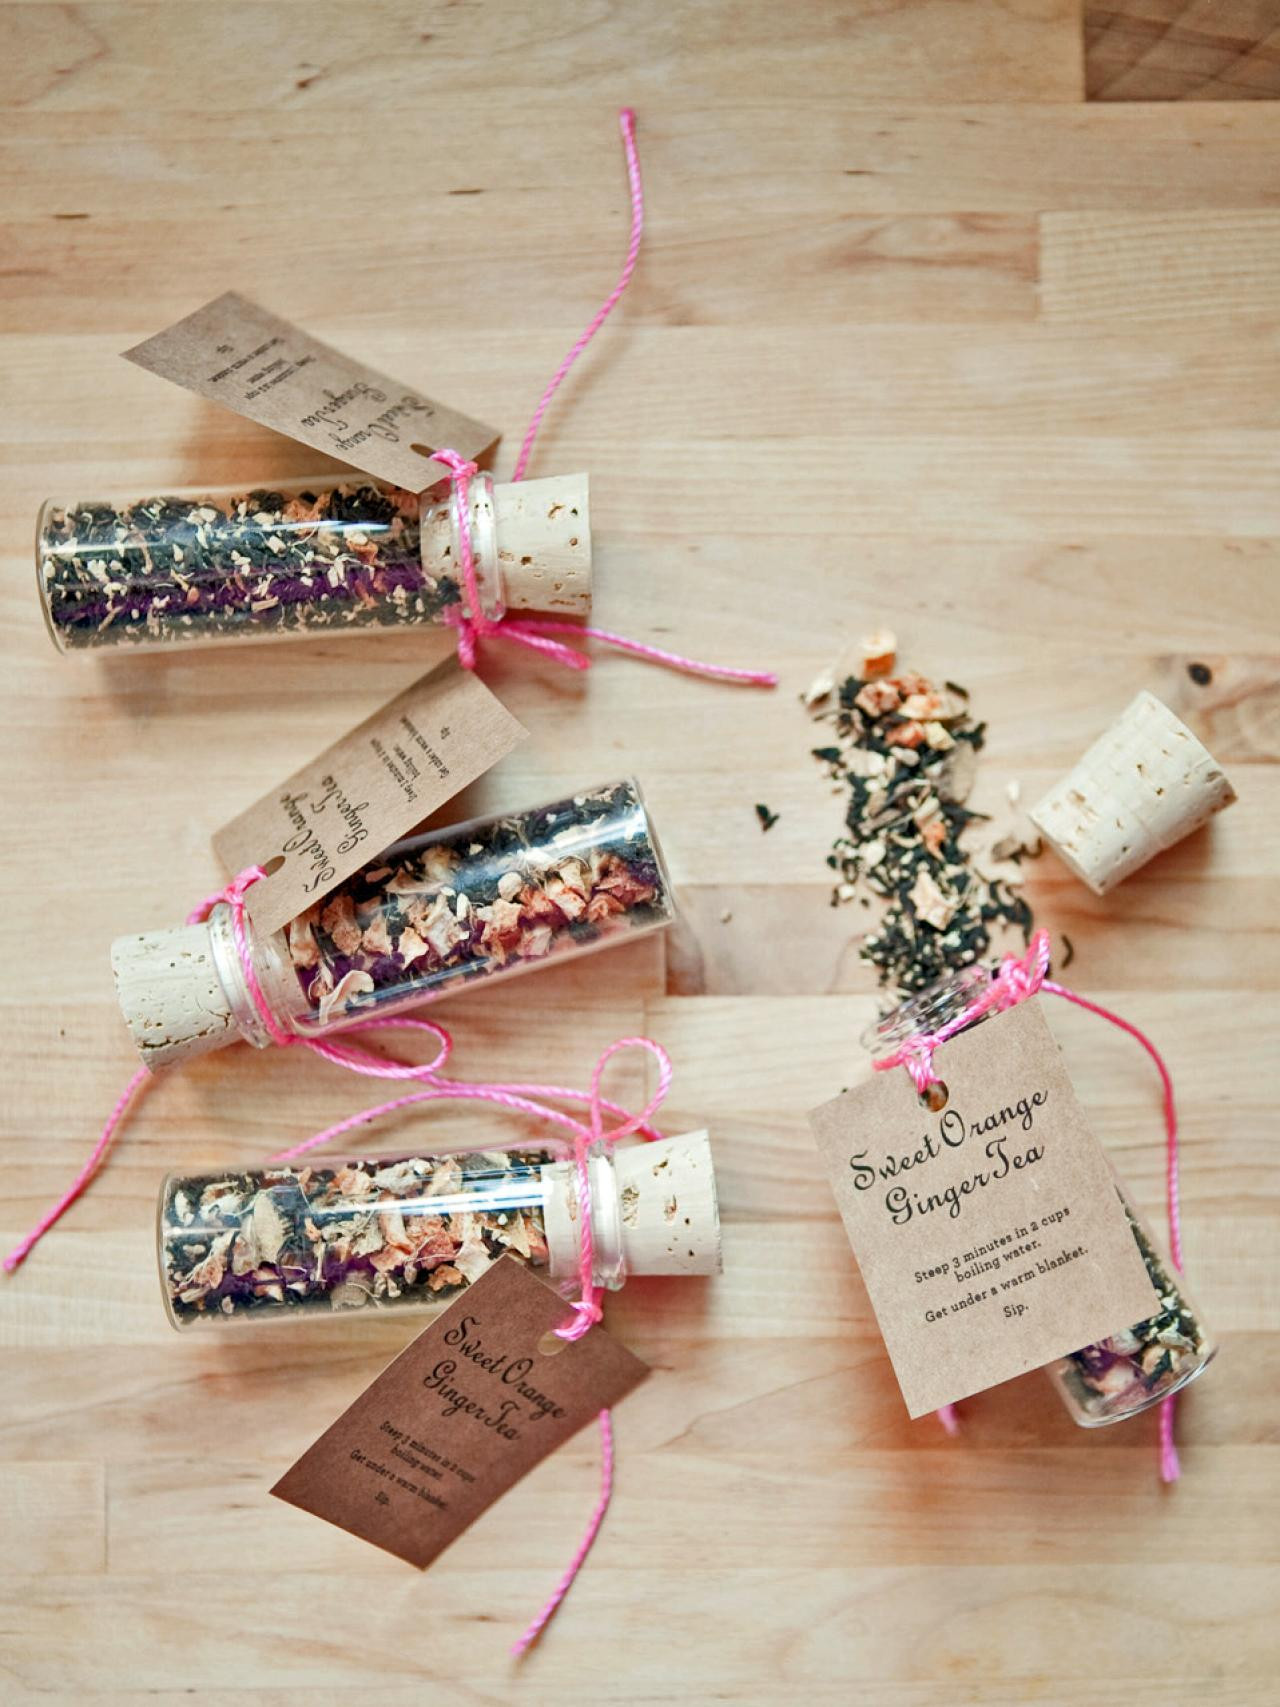 Christmas Party Favor Ideas
 30 Festive DIY Holiday Party Favors